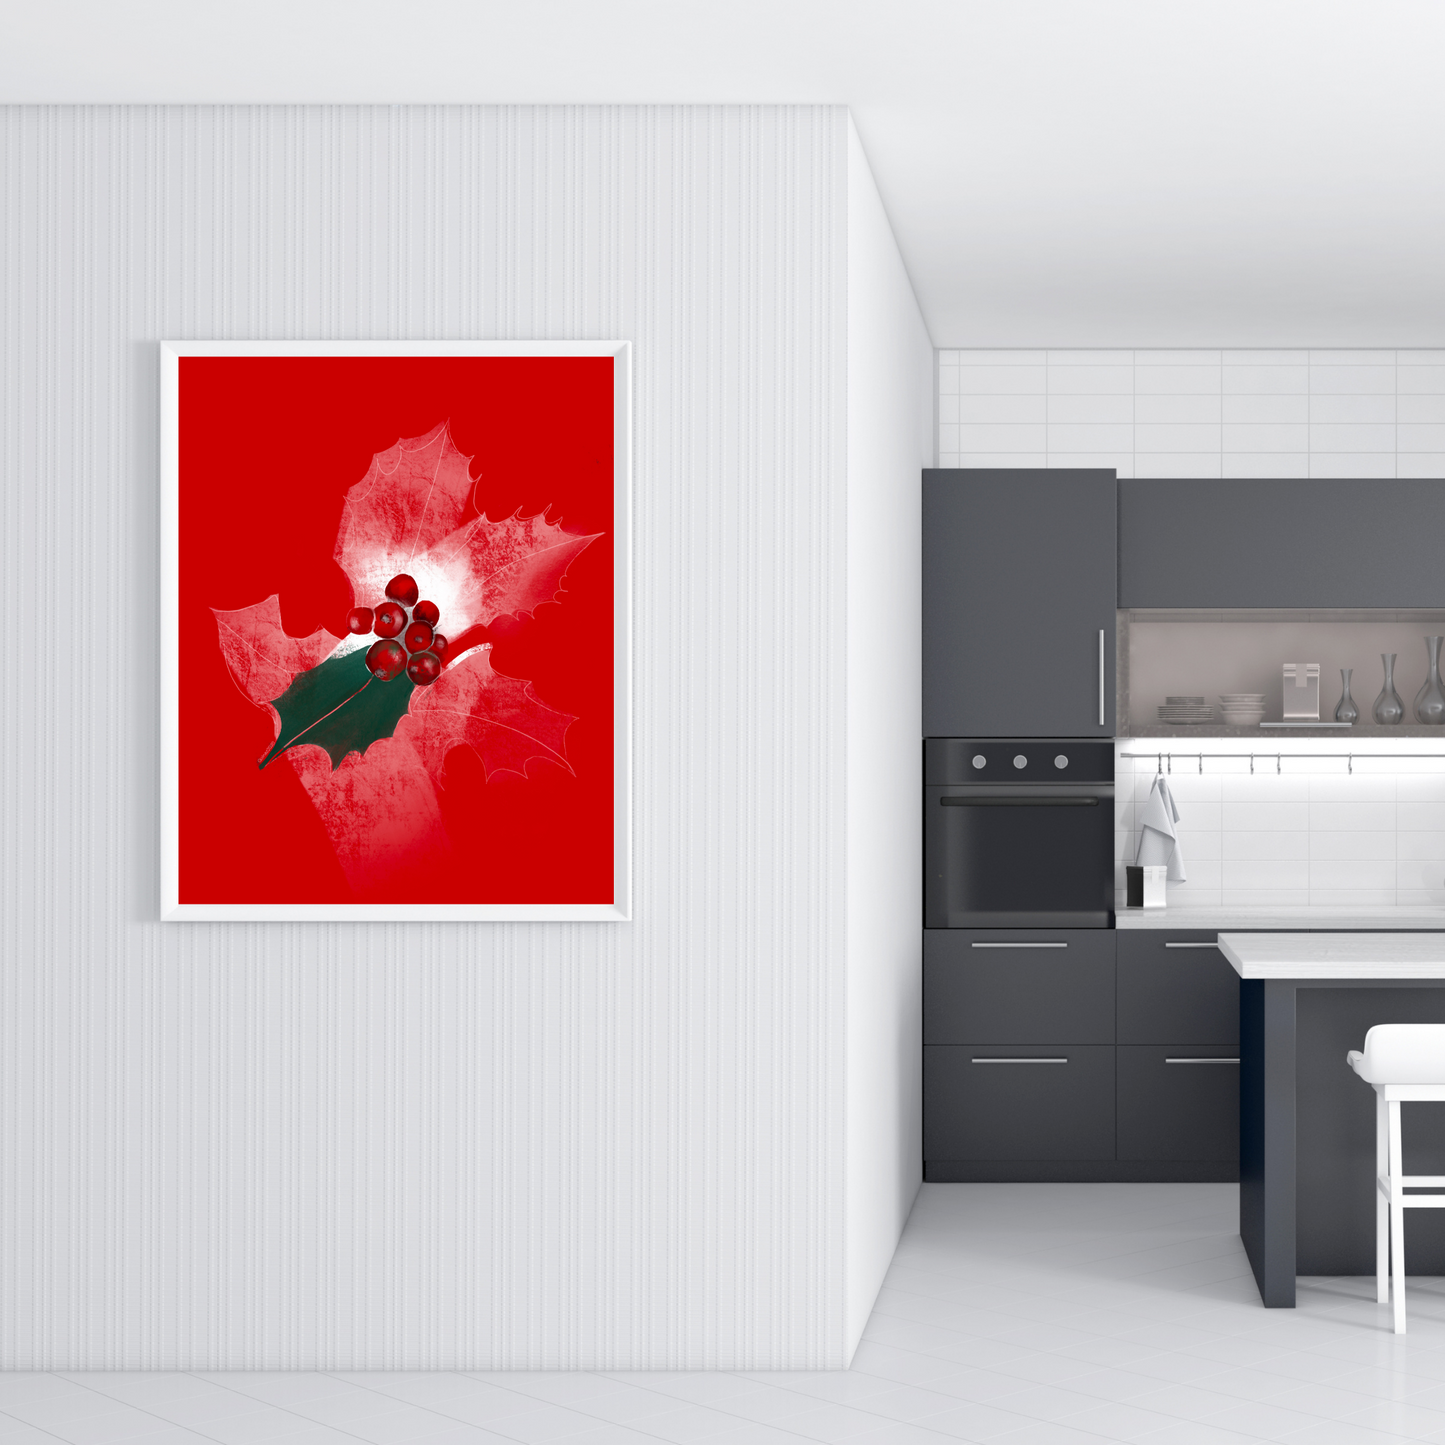 An example of the Holly painting by ArisaTeam in a kitchen